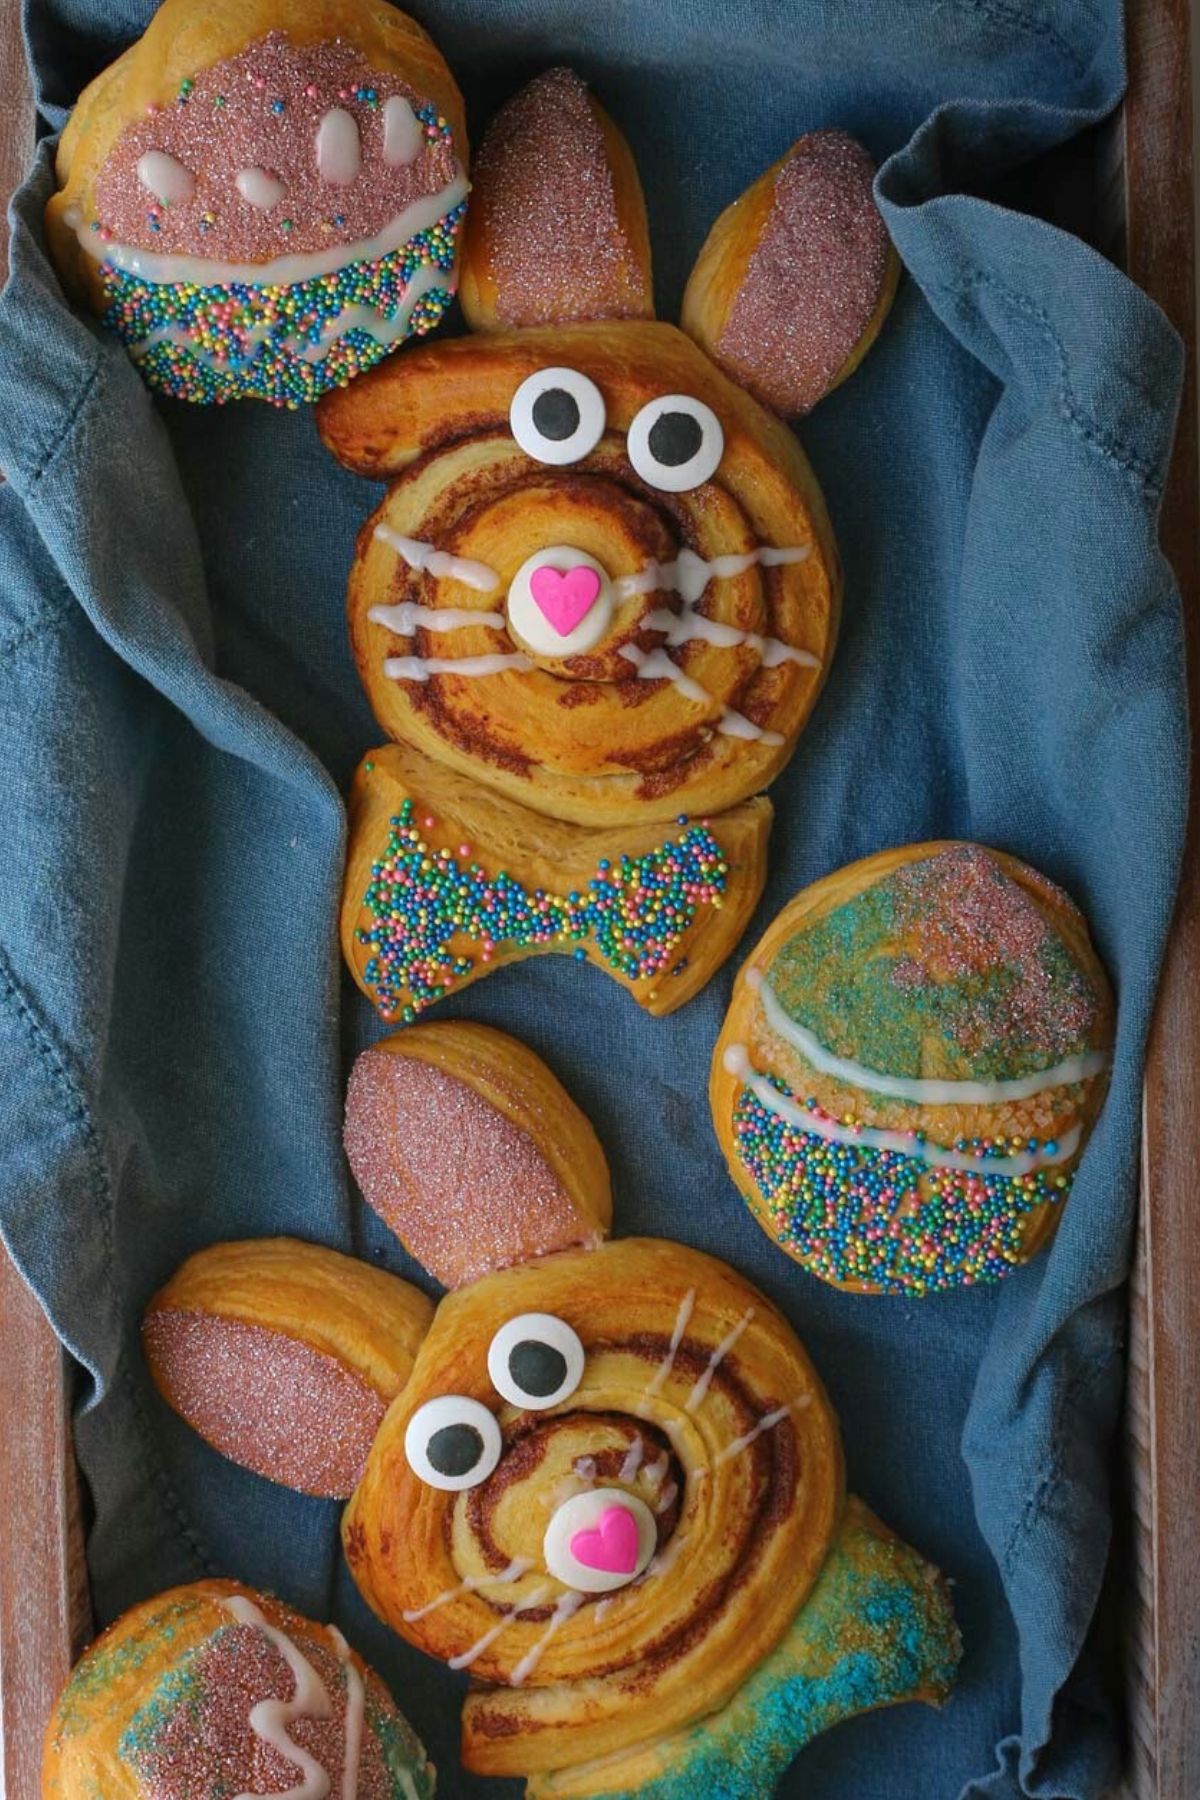 cinnamon roll easter bunnies and Easter egg biscuits in blue lined basket.